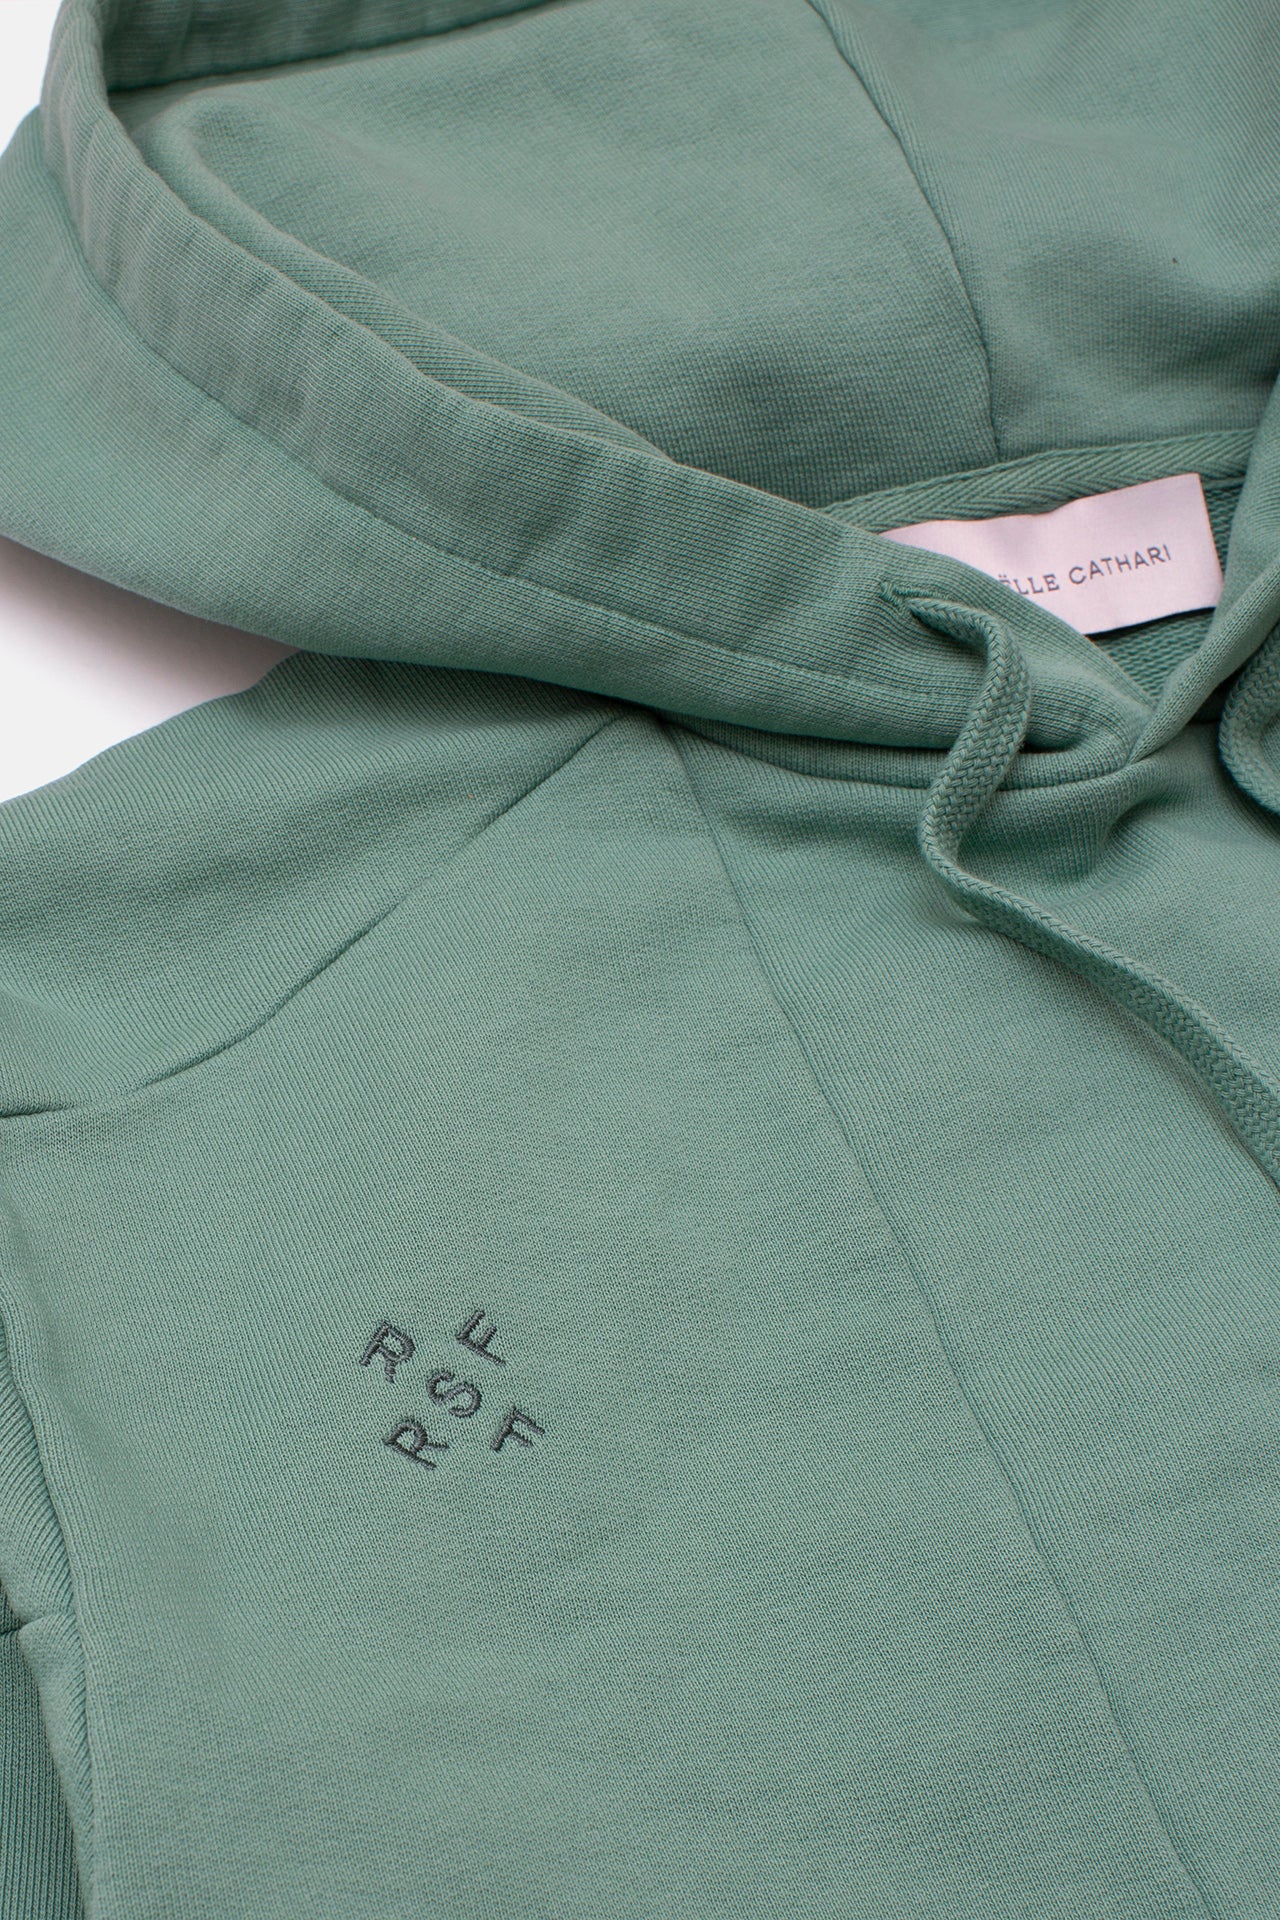 RSF x DC Deconstructed Hoodie Mint - Retrosuperfuture USA -